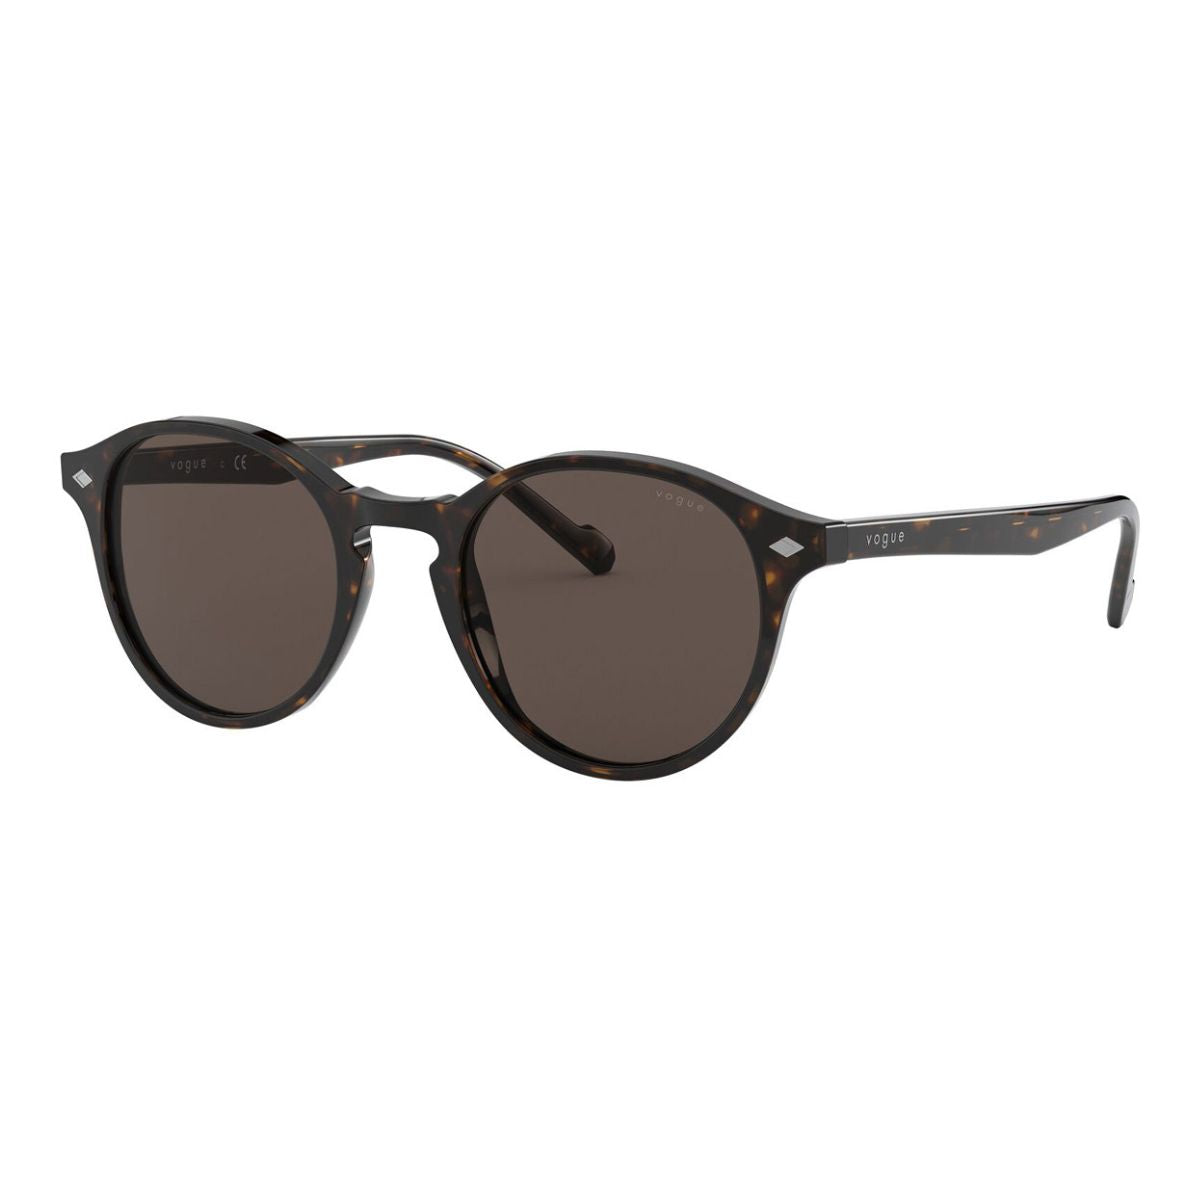 "Stylish Vogue sunglasses with rounded frames for womens At Optorium"